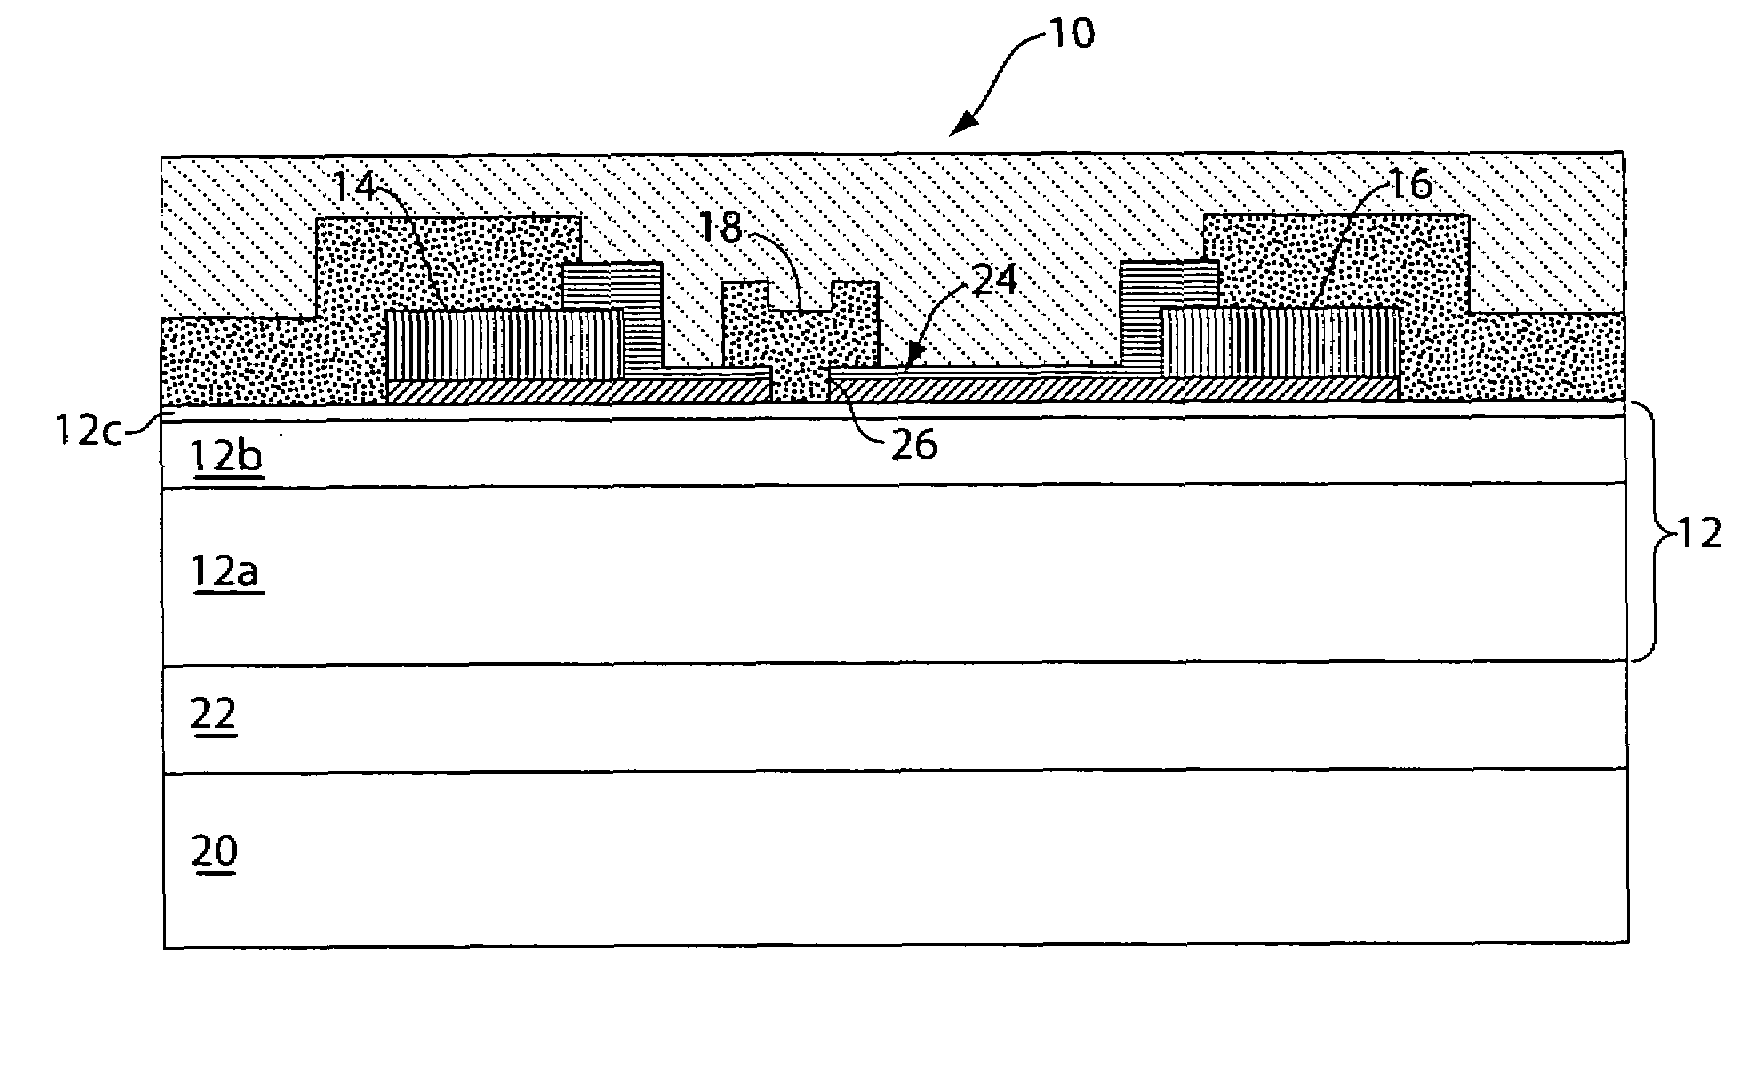 Gallium nitride material transistors and methods associated with the same